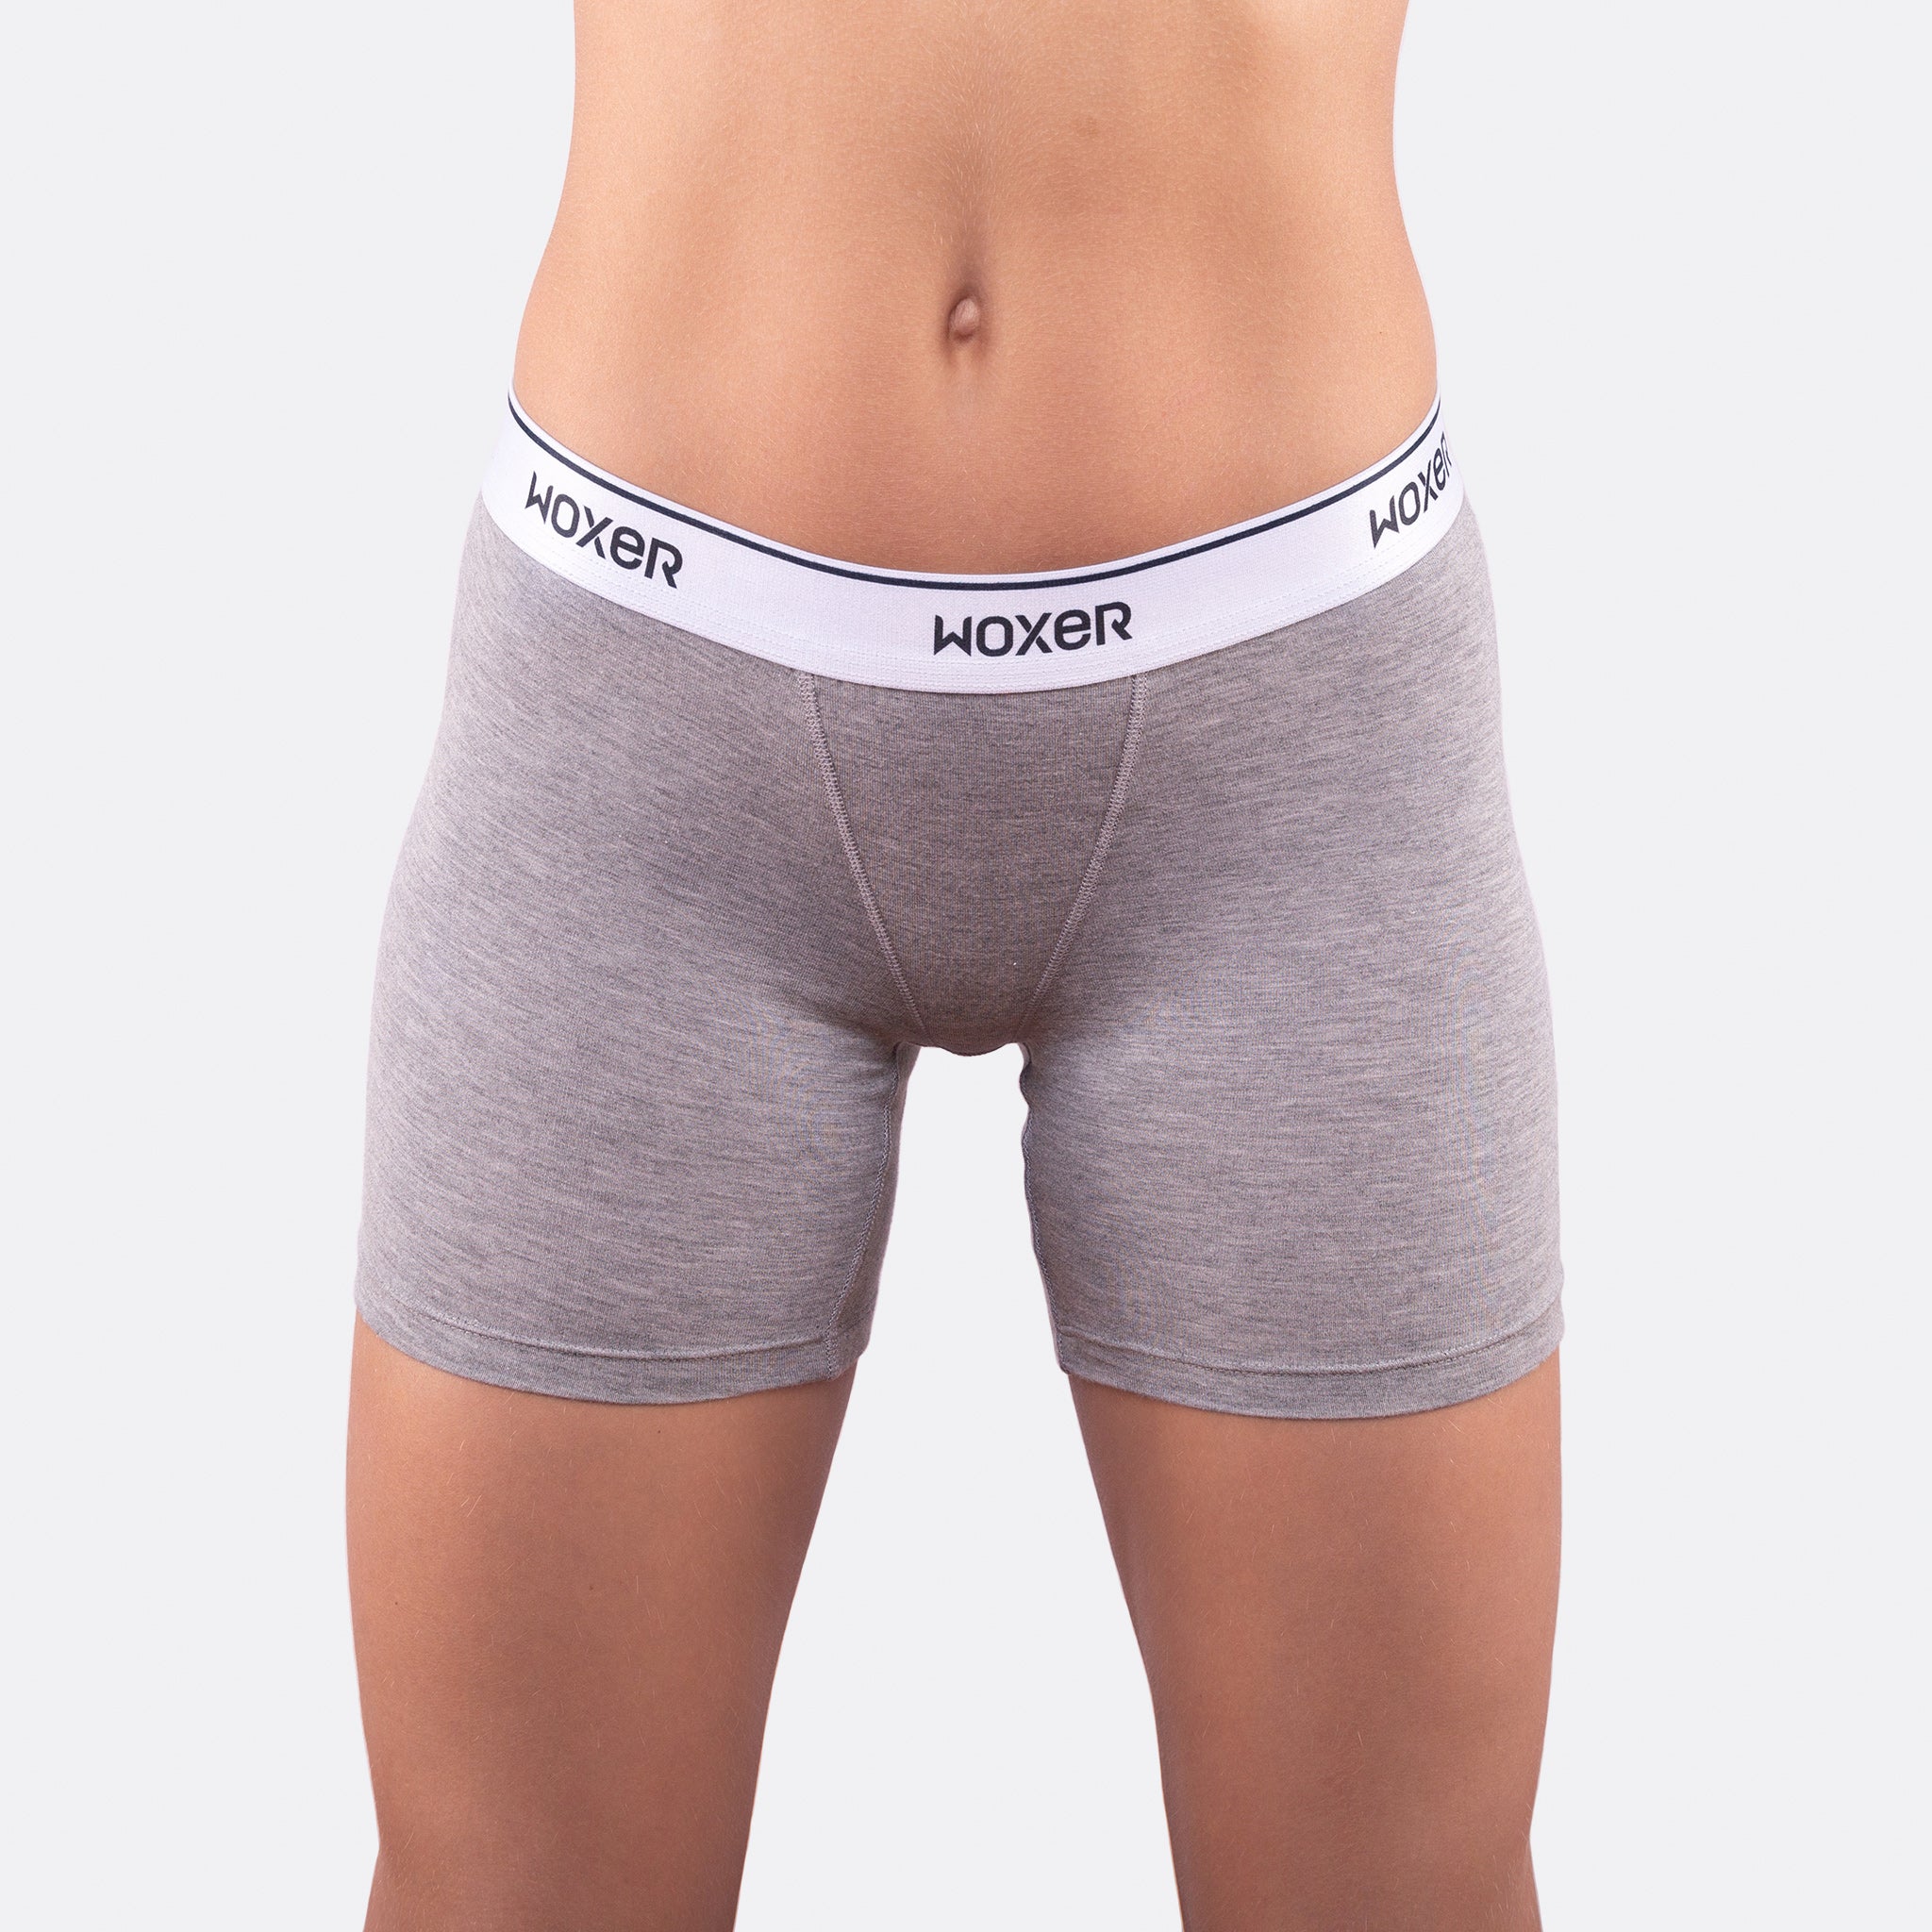 Woxer Reviews: Are Their Women's Boxers Worth It?